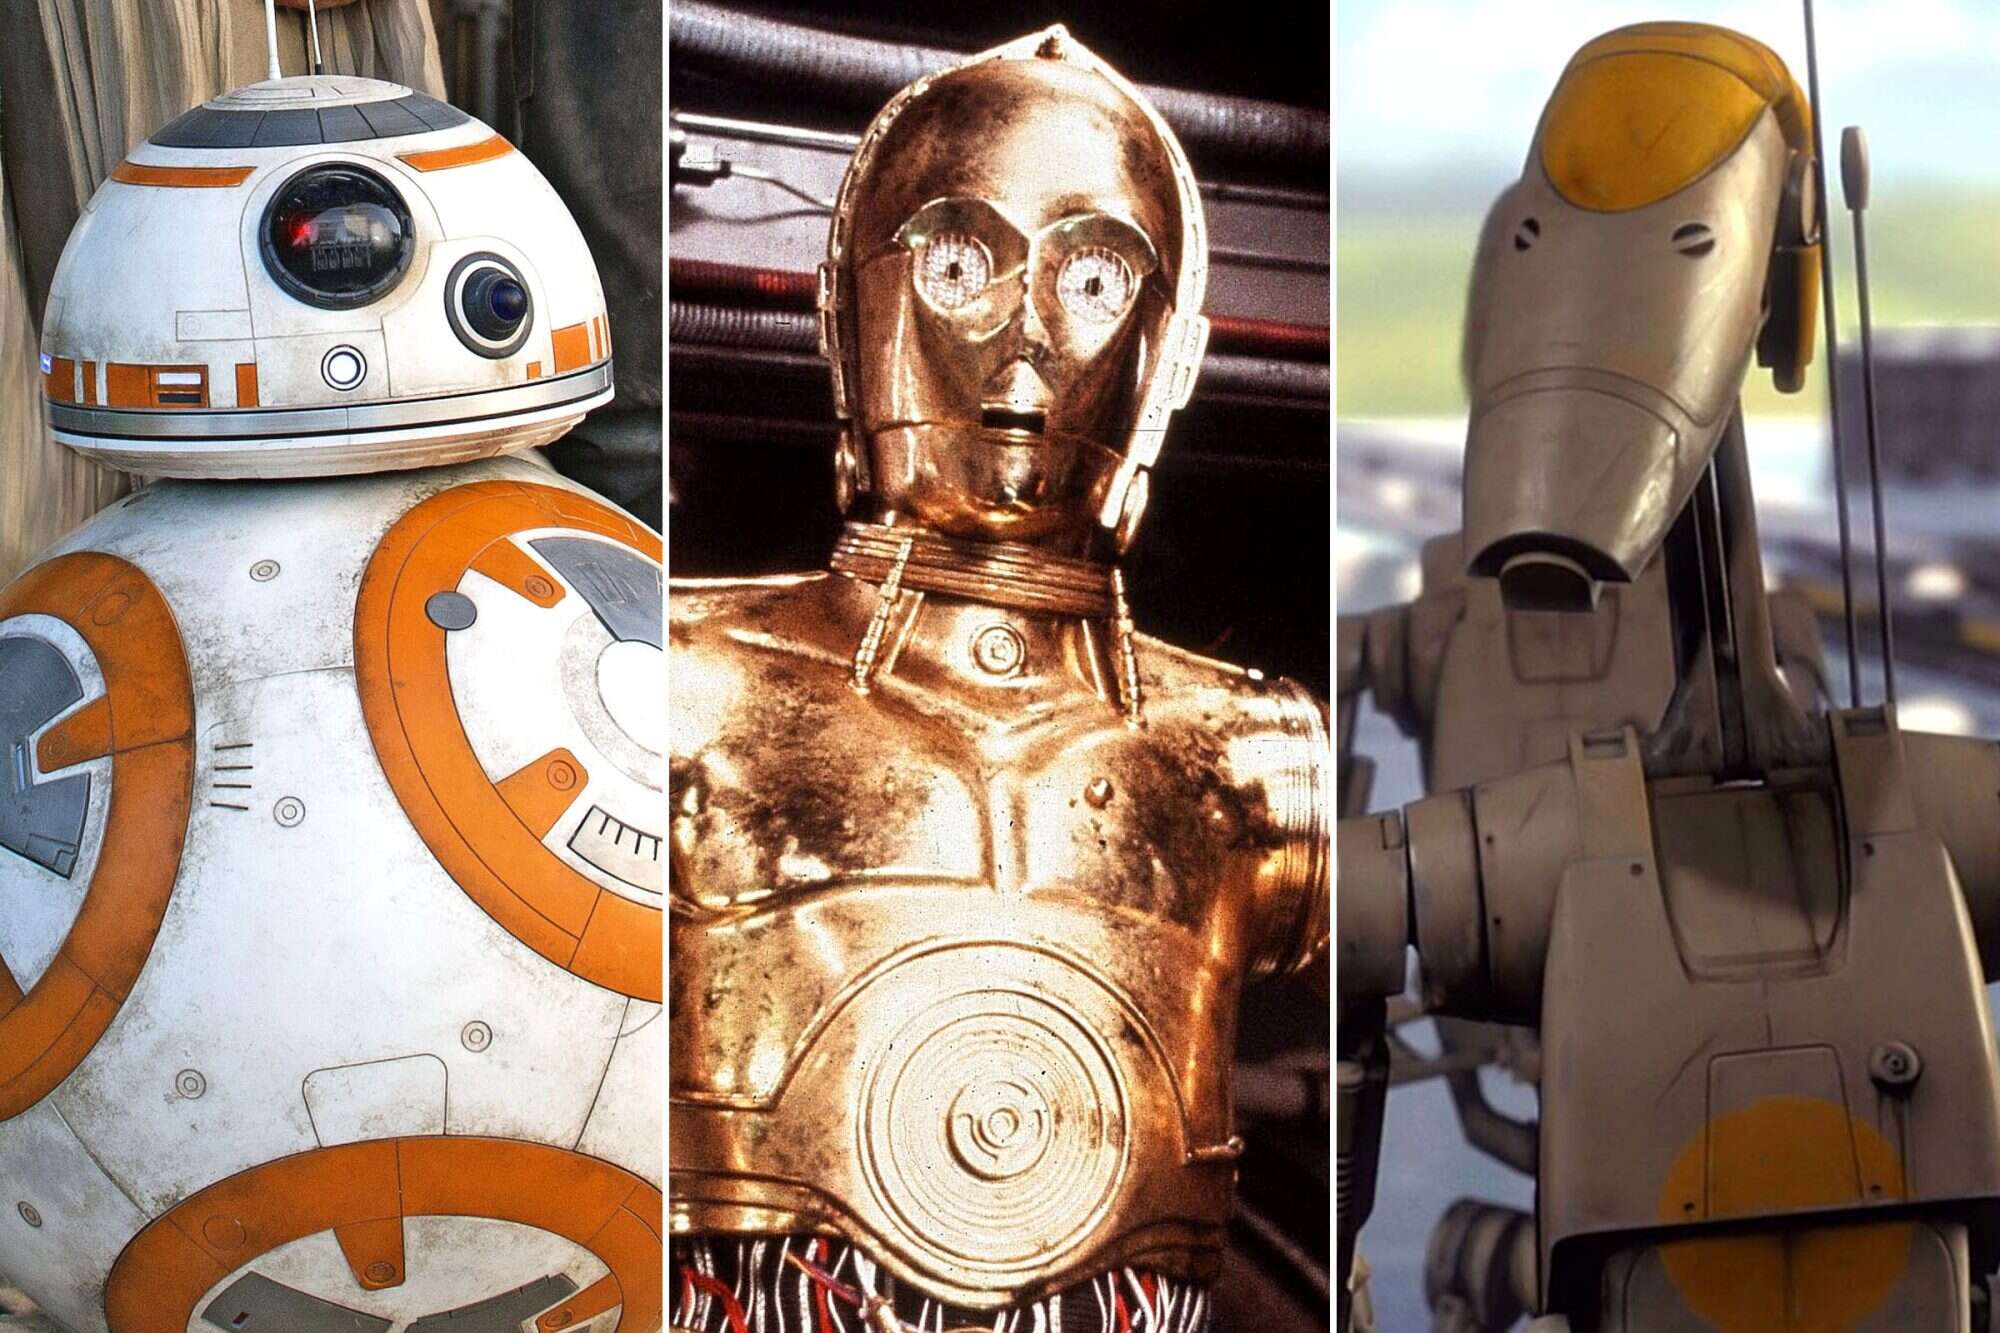 What are the names of the two droids in Star Wars?